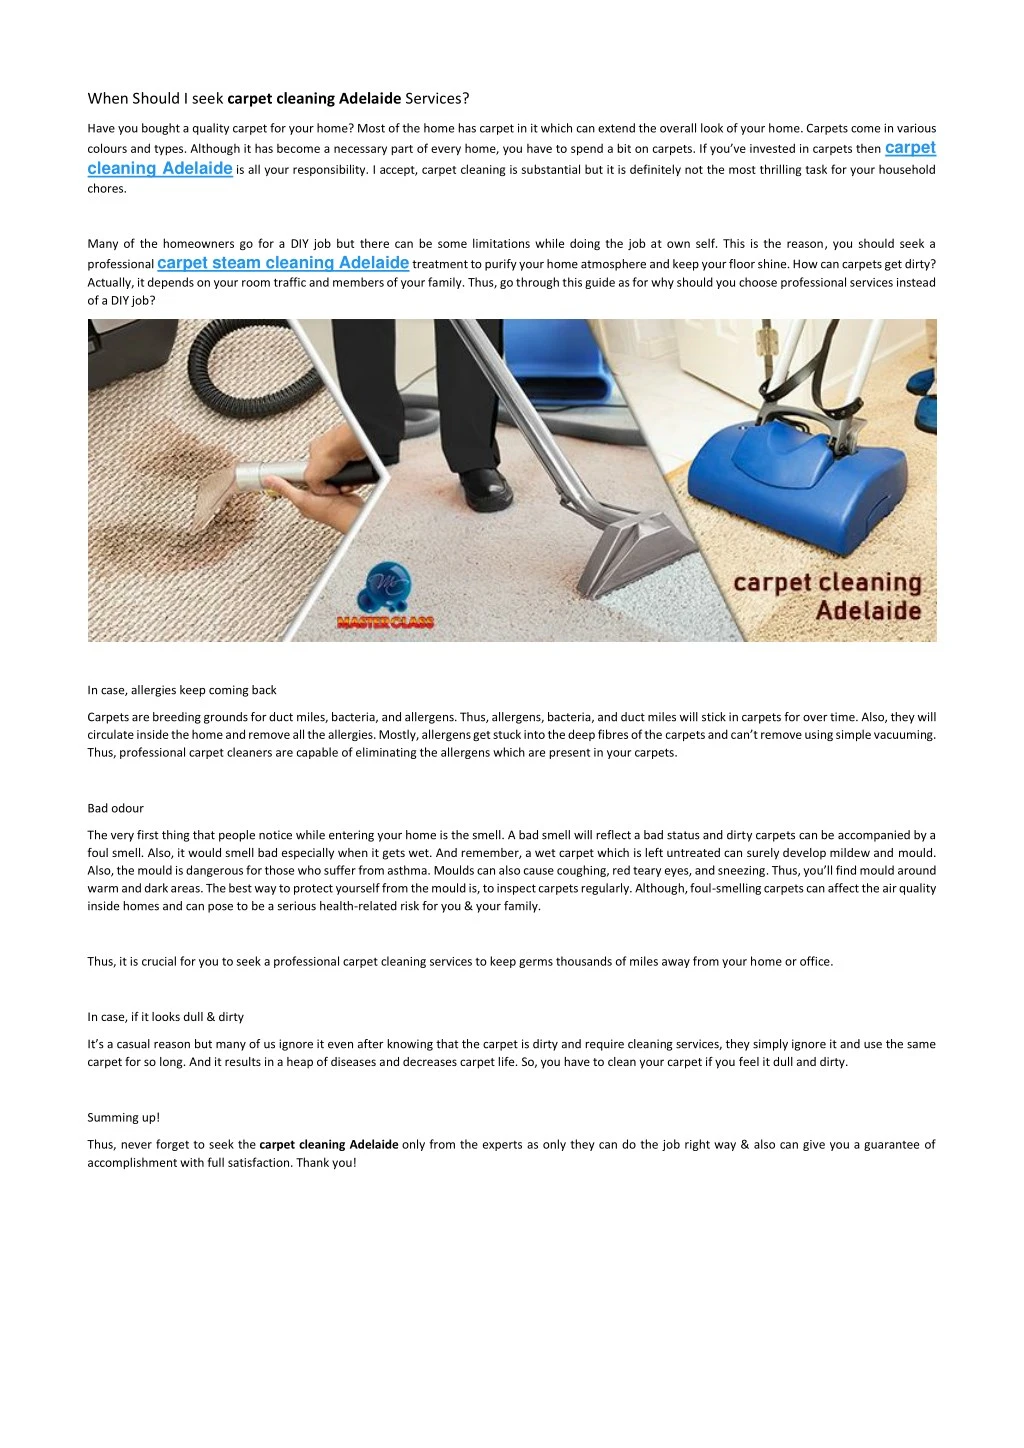 when should i seek carpet cleaning adelaide